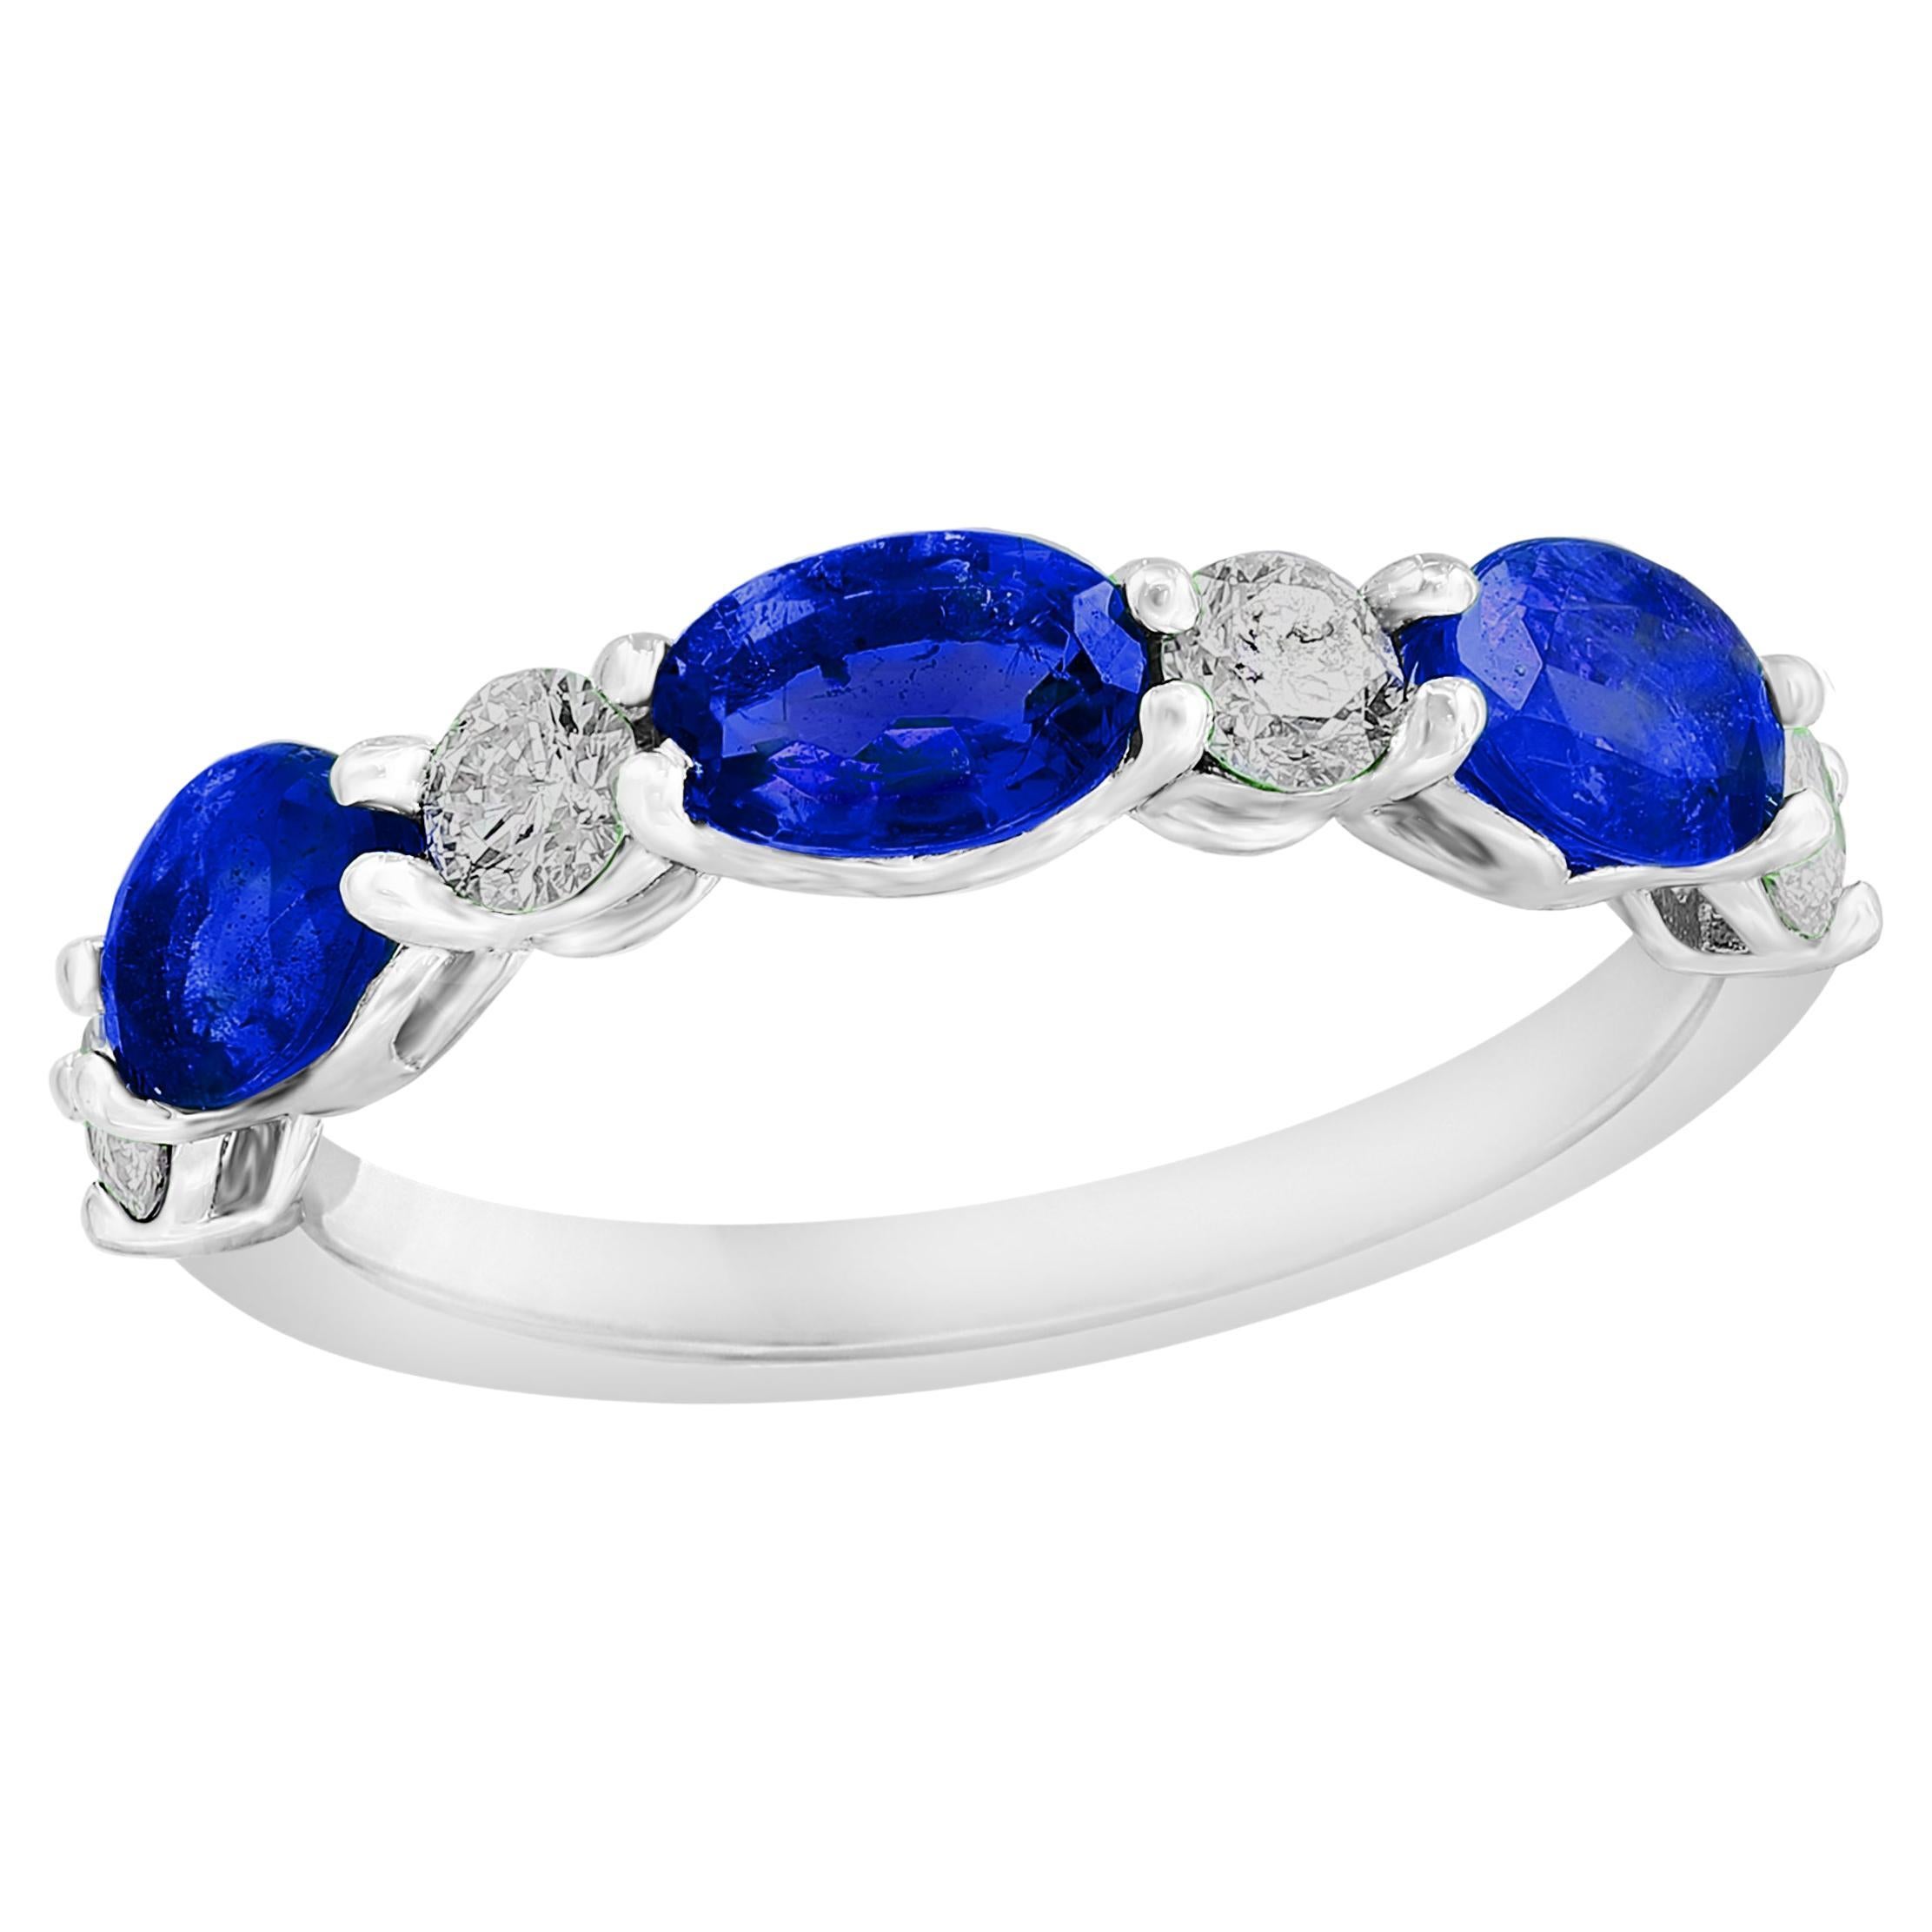 1.62 Carat Oval Cut Sapphire and Diamond Band in 14K White Gold For Sale